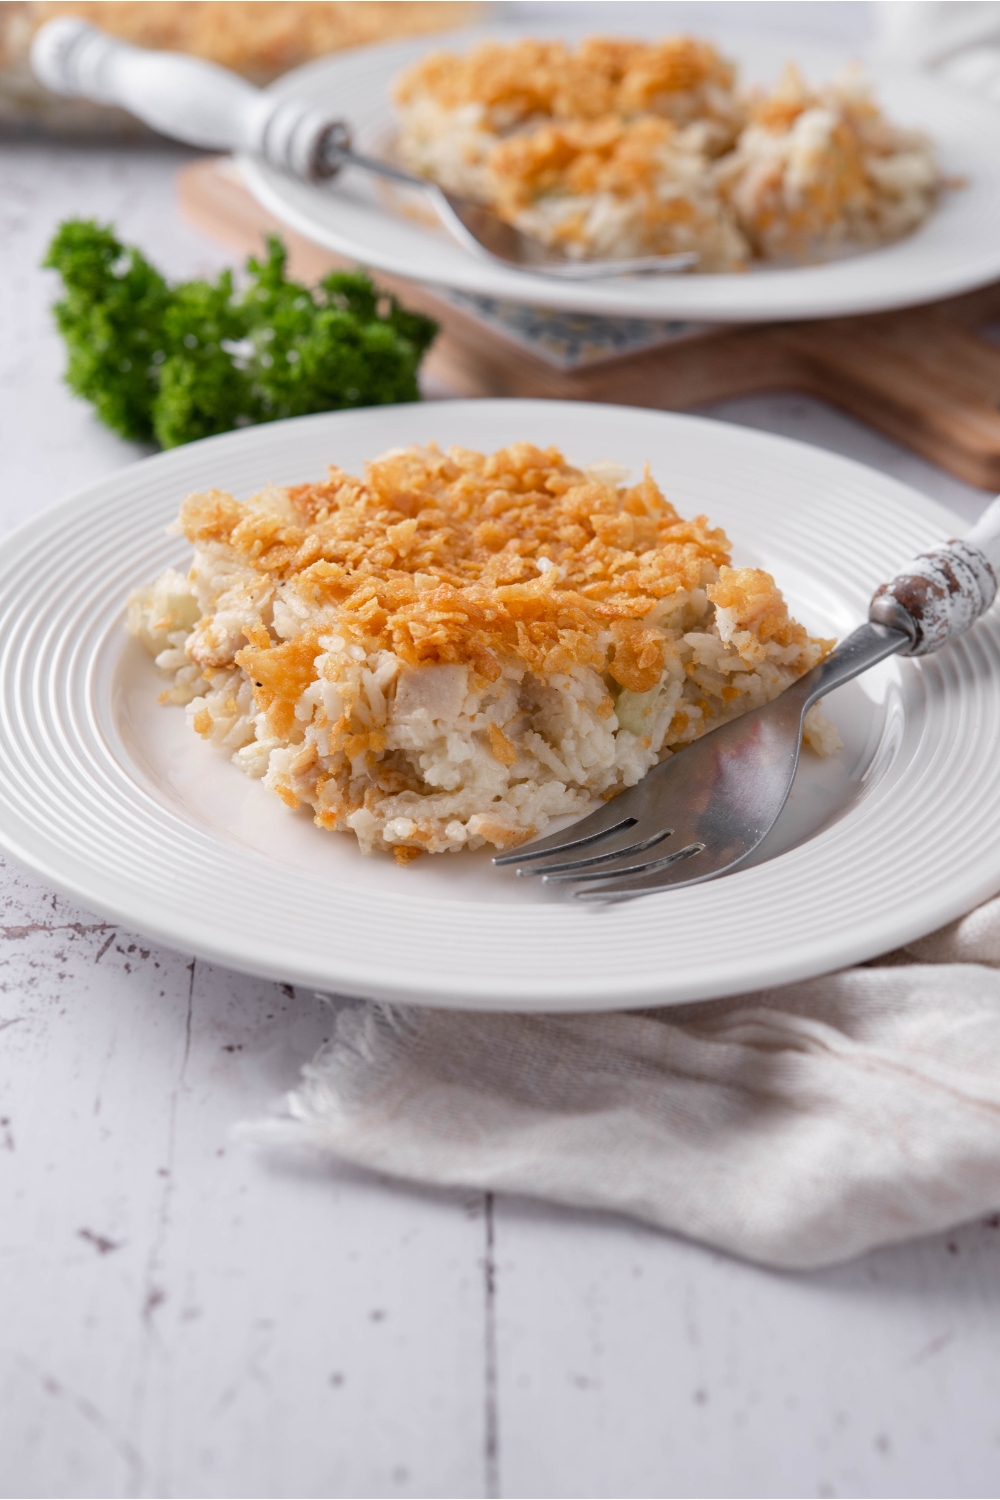 A plate with a serving of rotisserie chicken casserole topped with crushed cornflakes. There is a fork on the plate and a second serving of casserole in the background.